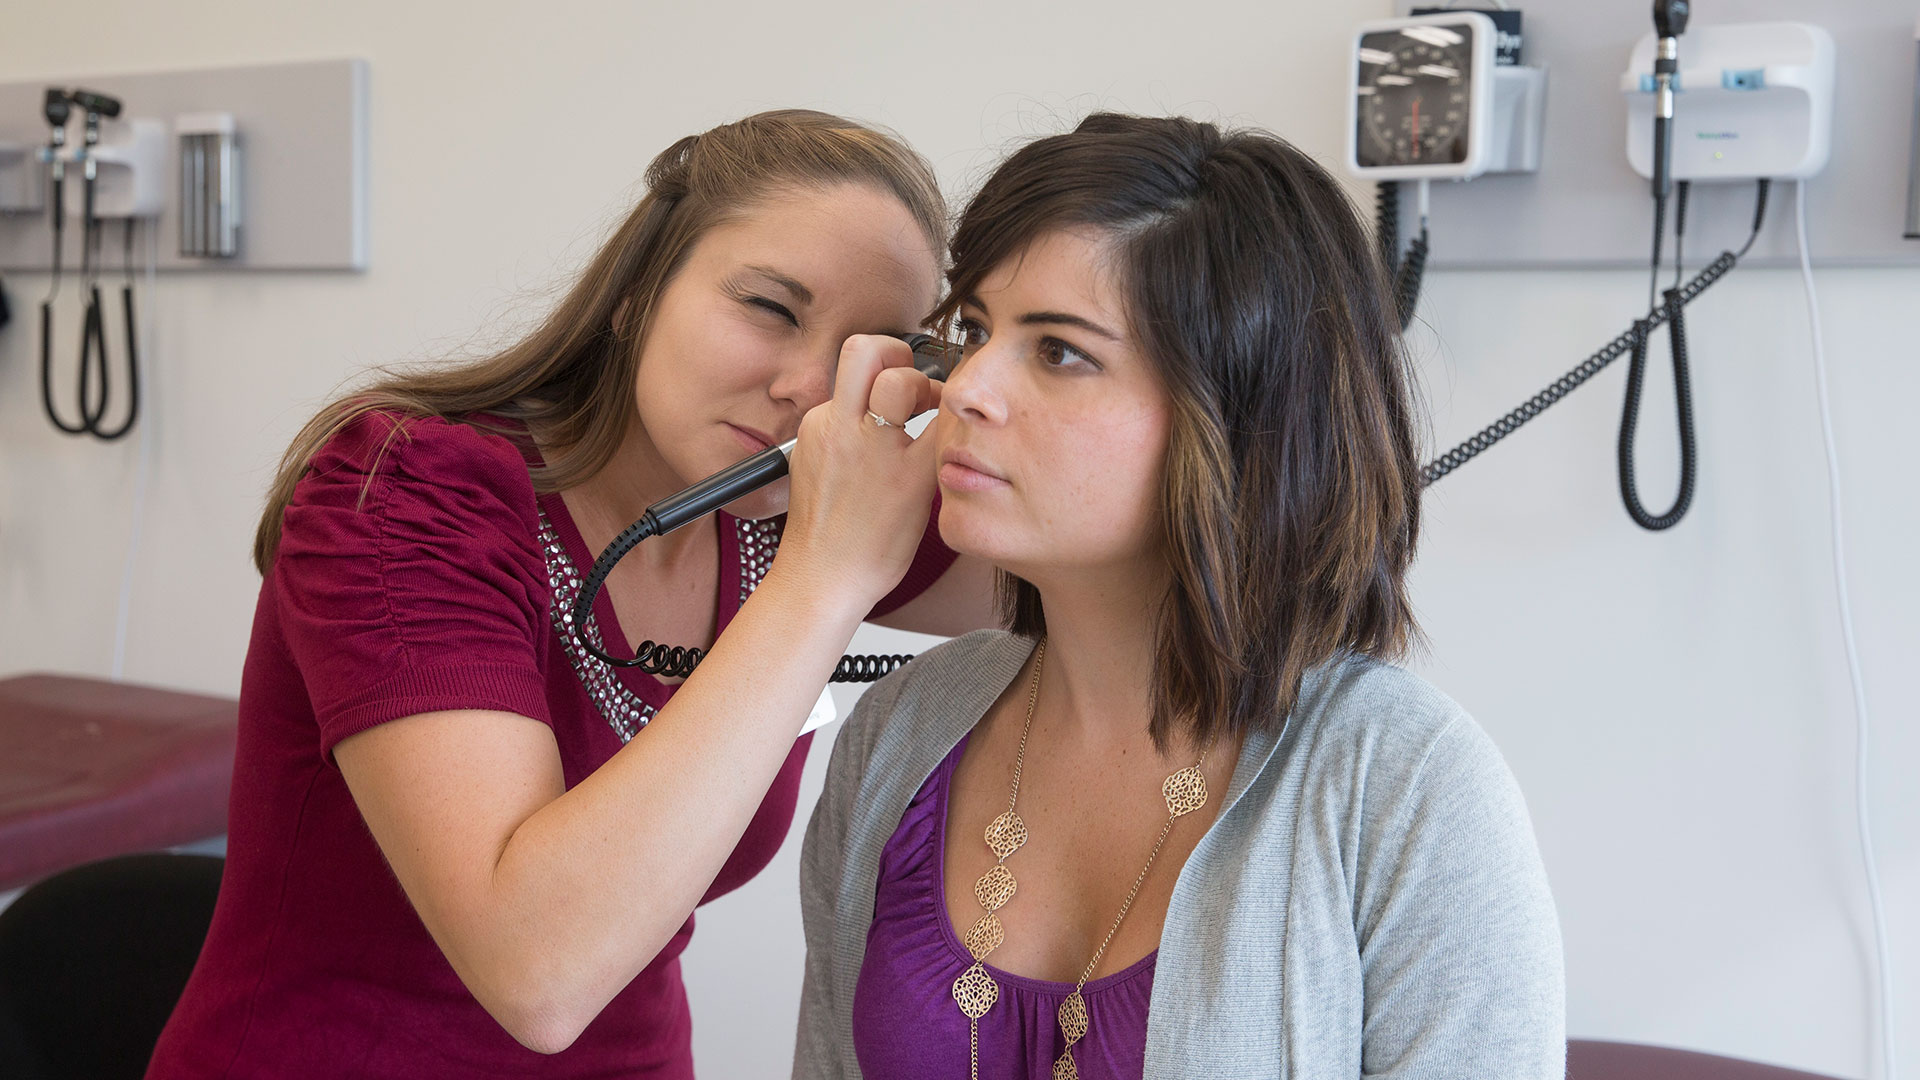 A nursing student checks inside her patient's ear with an otoscope.